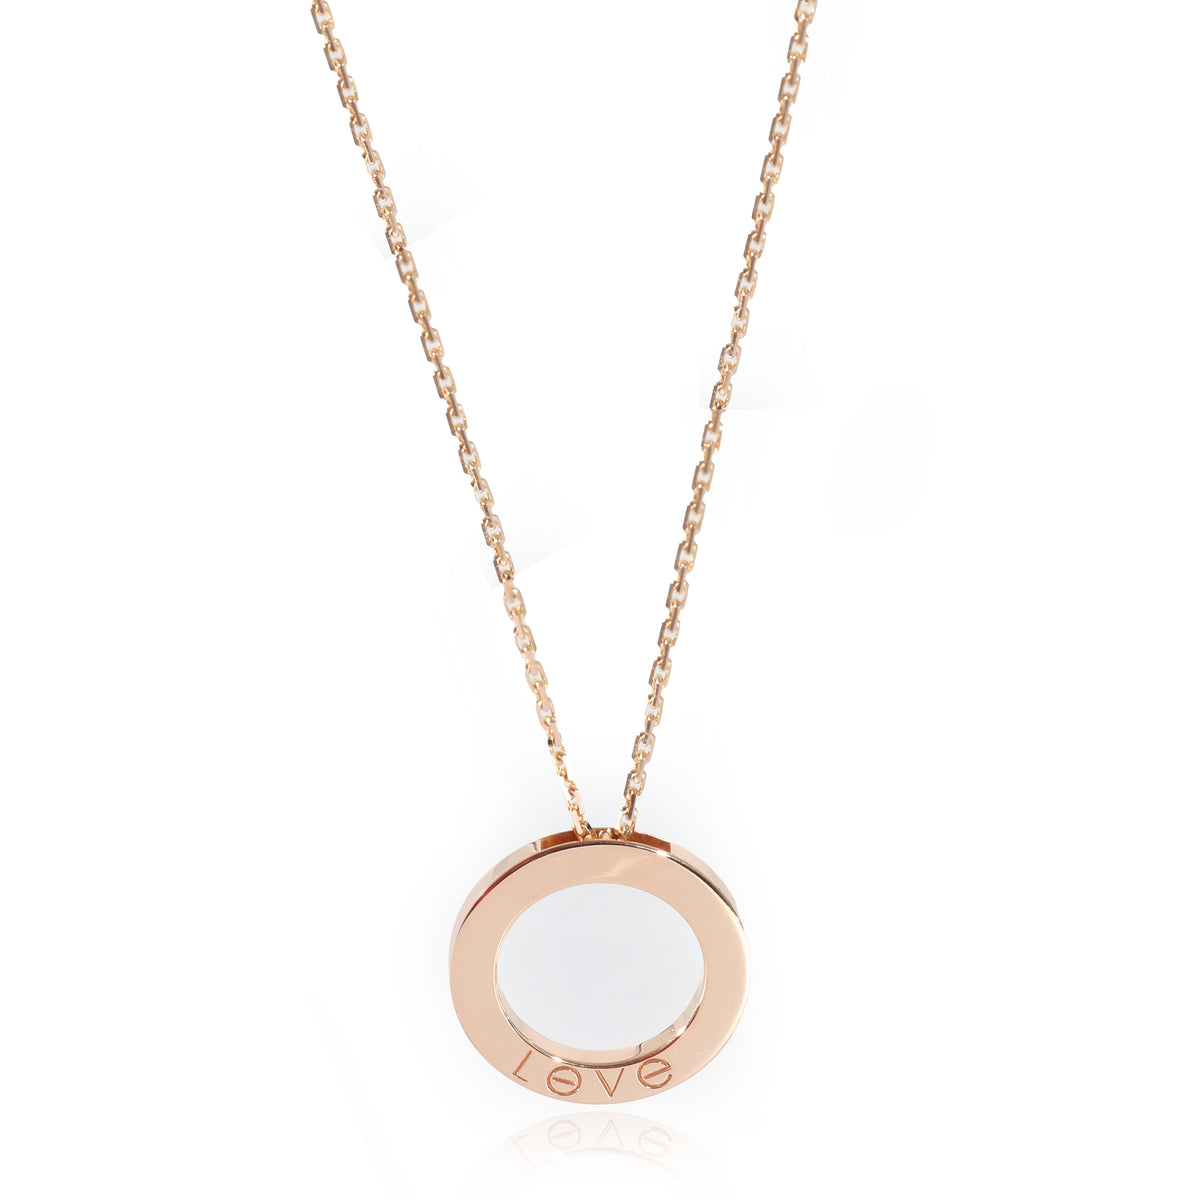 Cartier Love Diamond Necklace in 18k Rose Gold